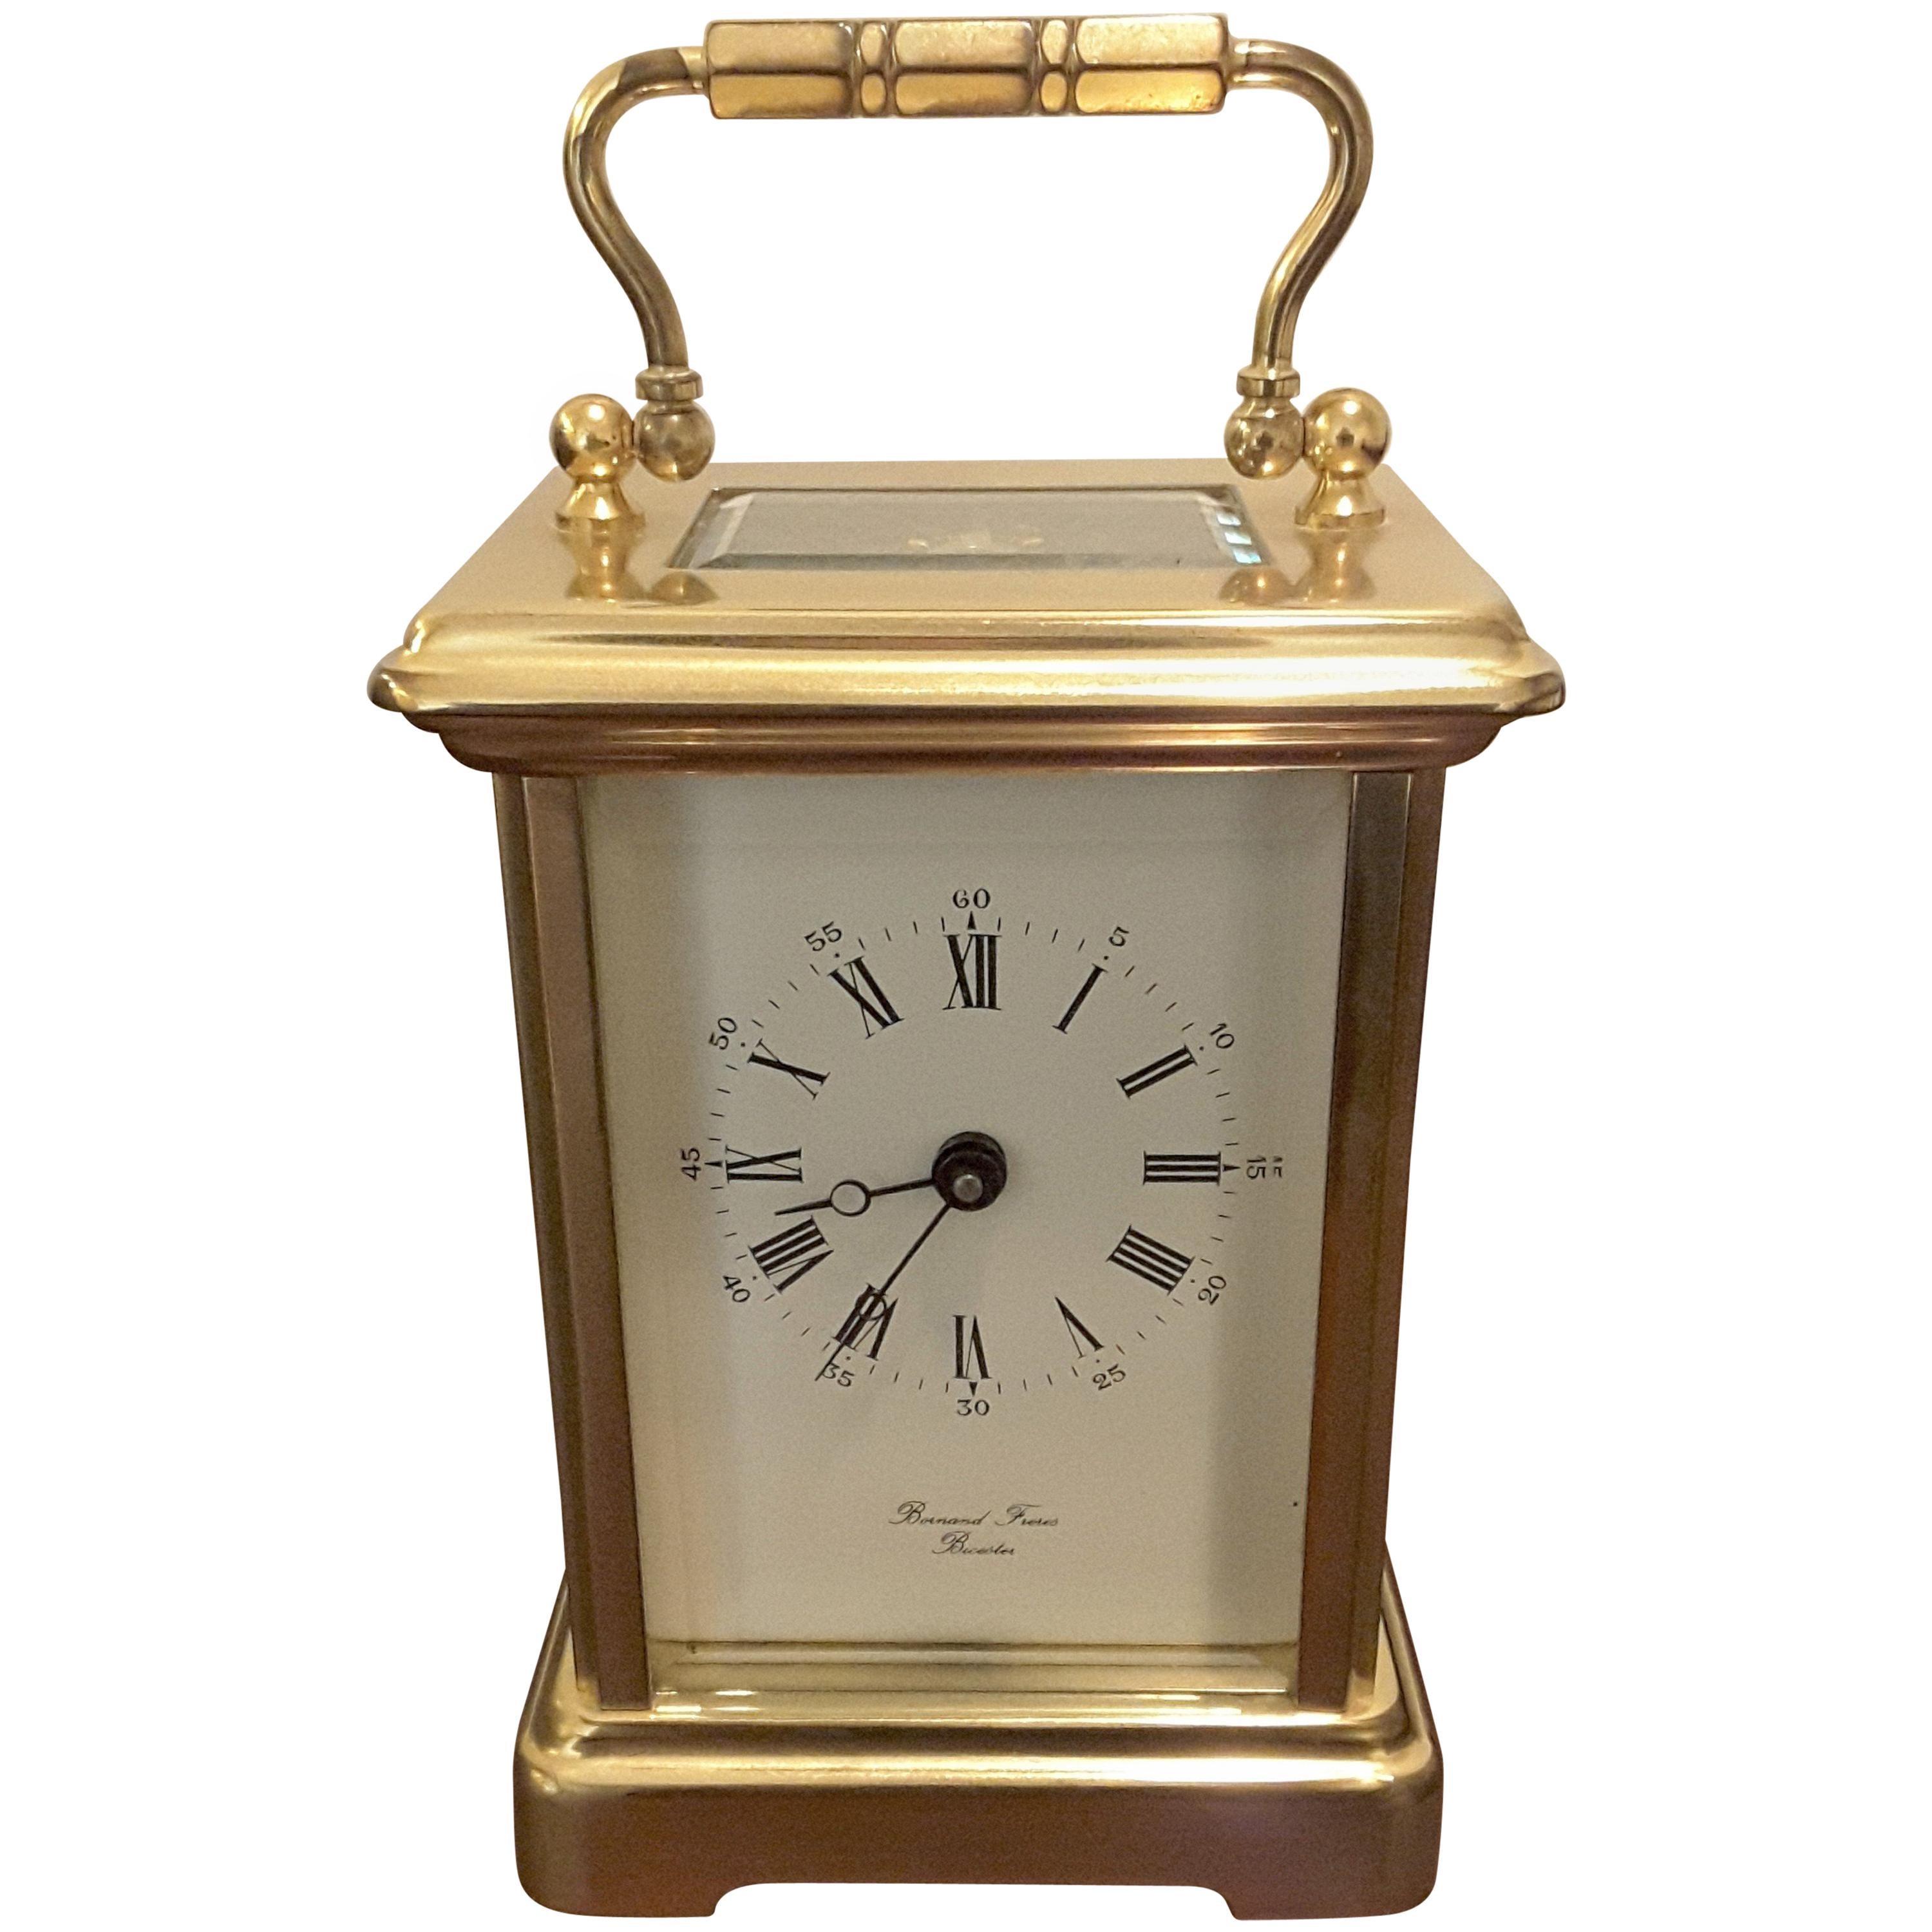 Brass Carriage Clock by Bornand Freres, England